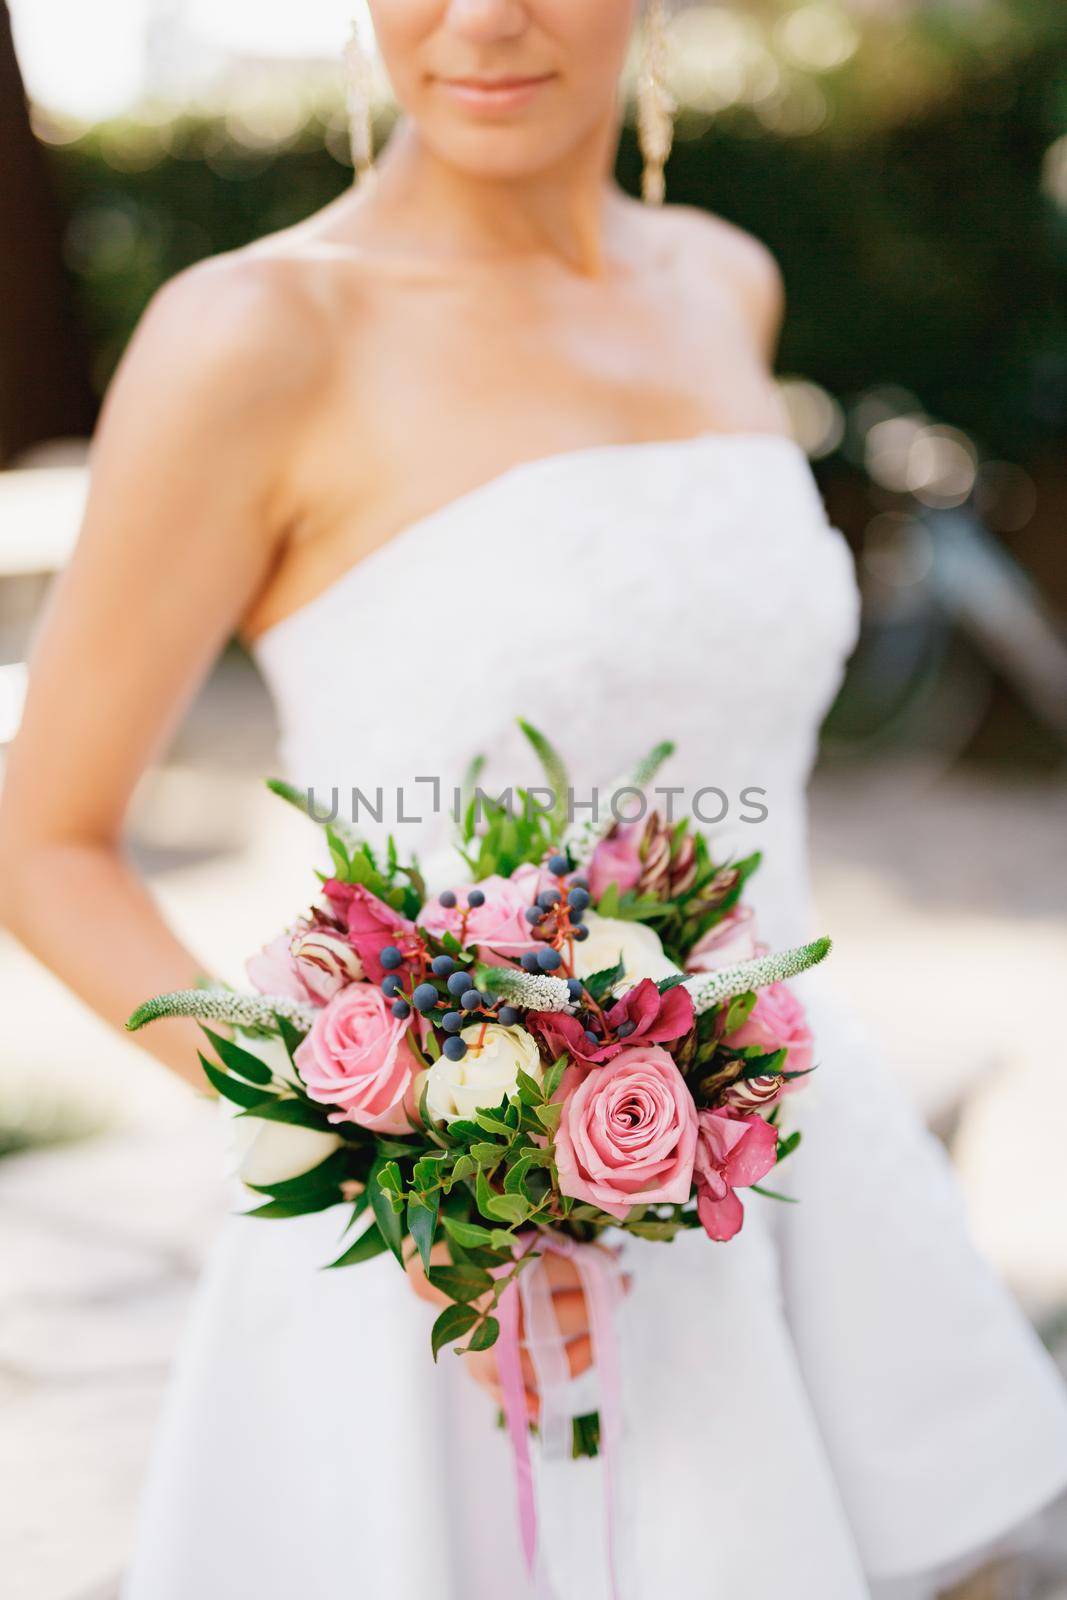 A sophisticated bride holding a wedding bouquet with roses, veronica, viburnum and boxwood in her hands, close-up by Nadtochiy